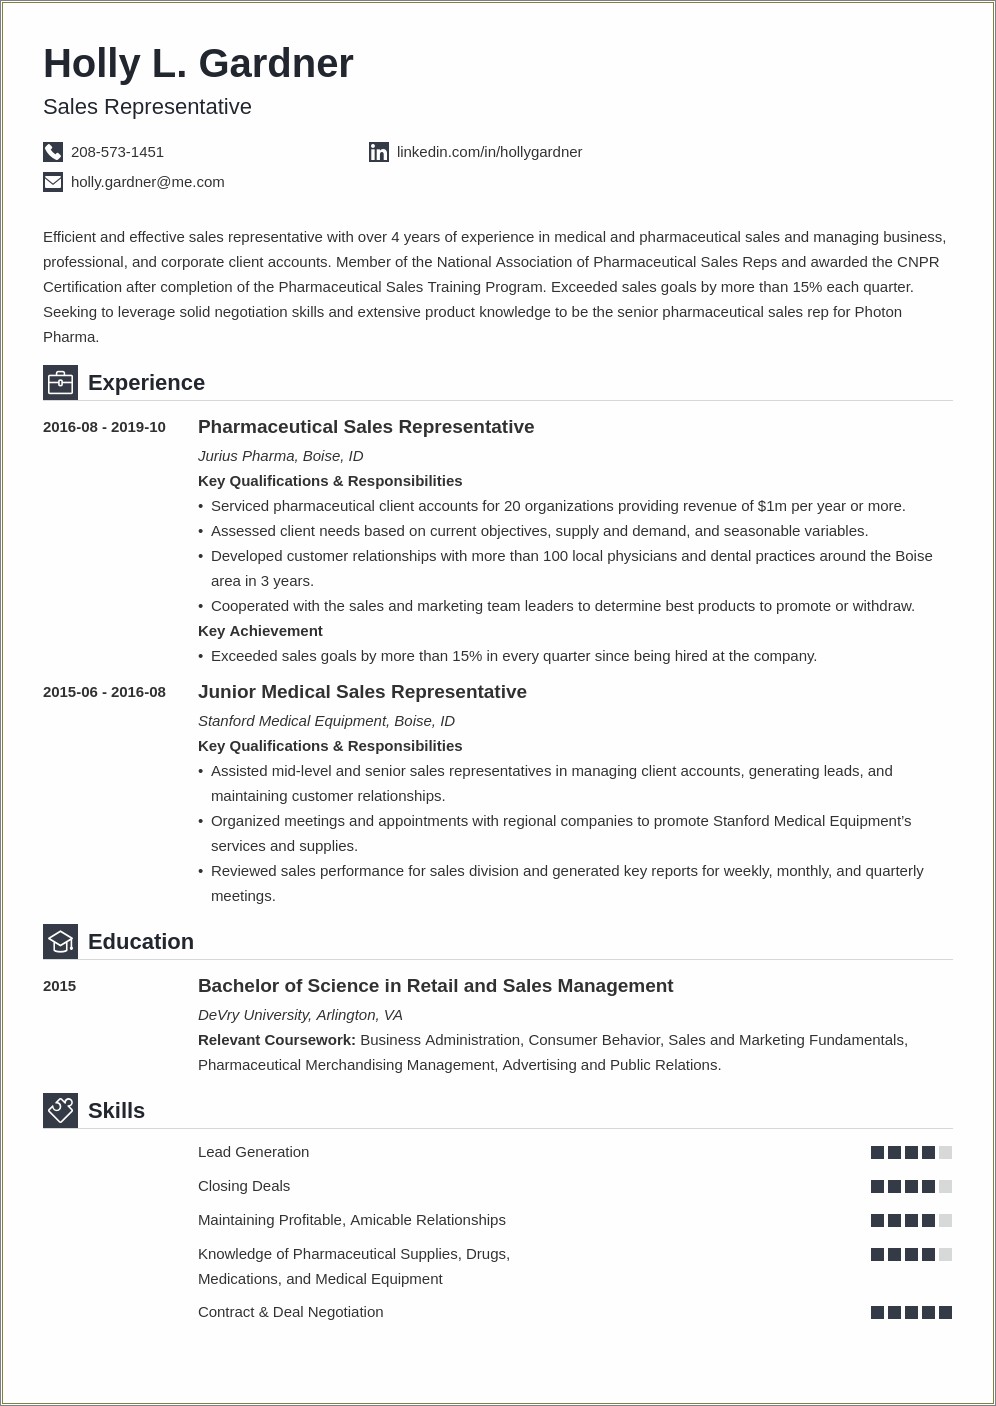 Resume Objective Examples For Sales And Marketing